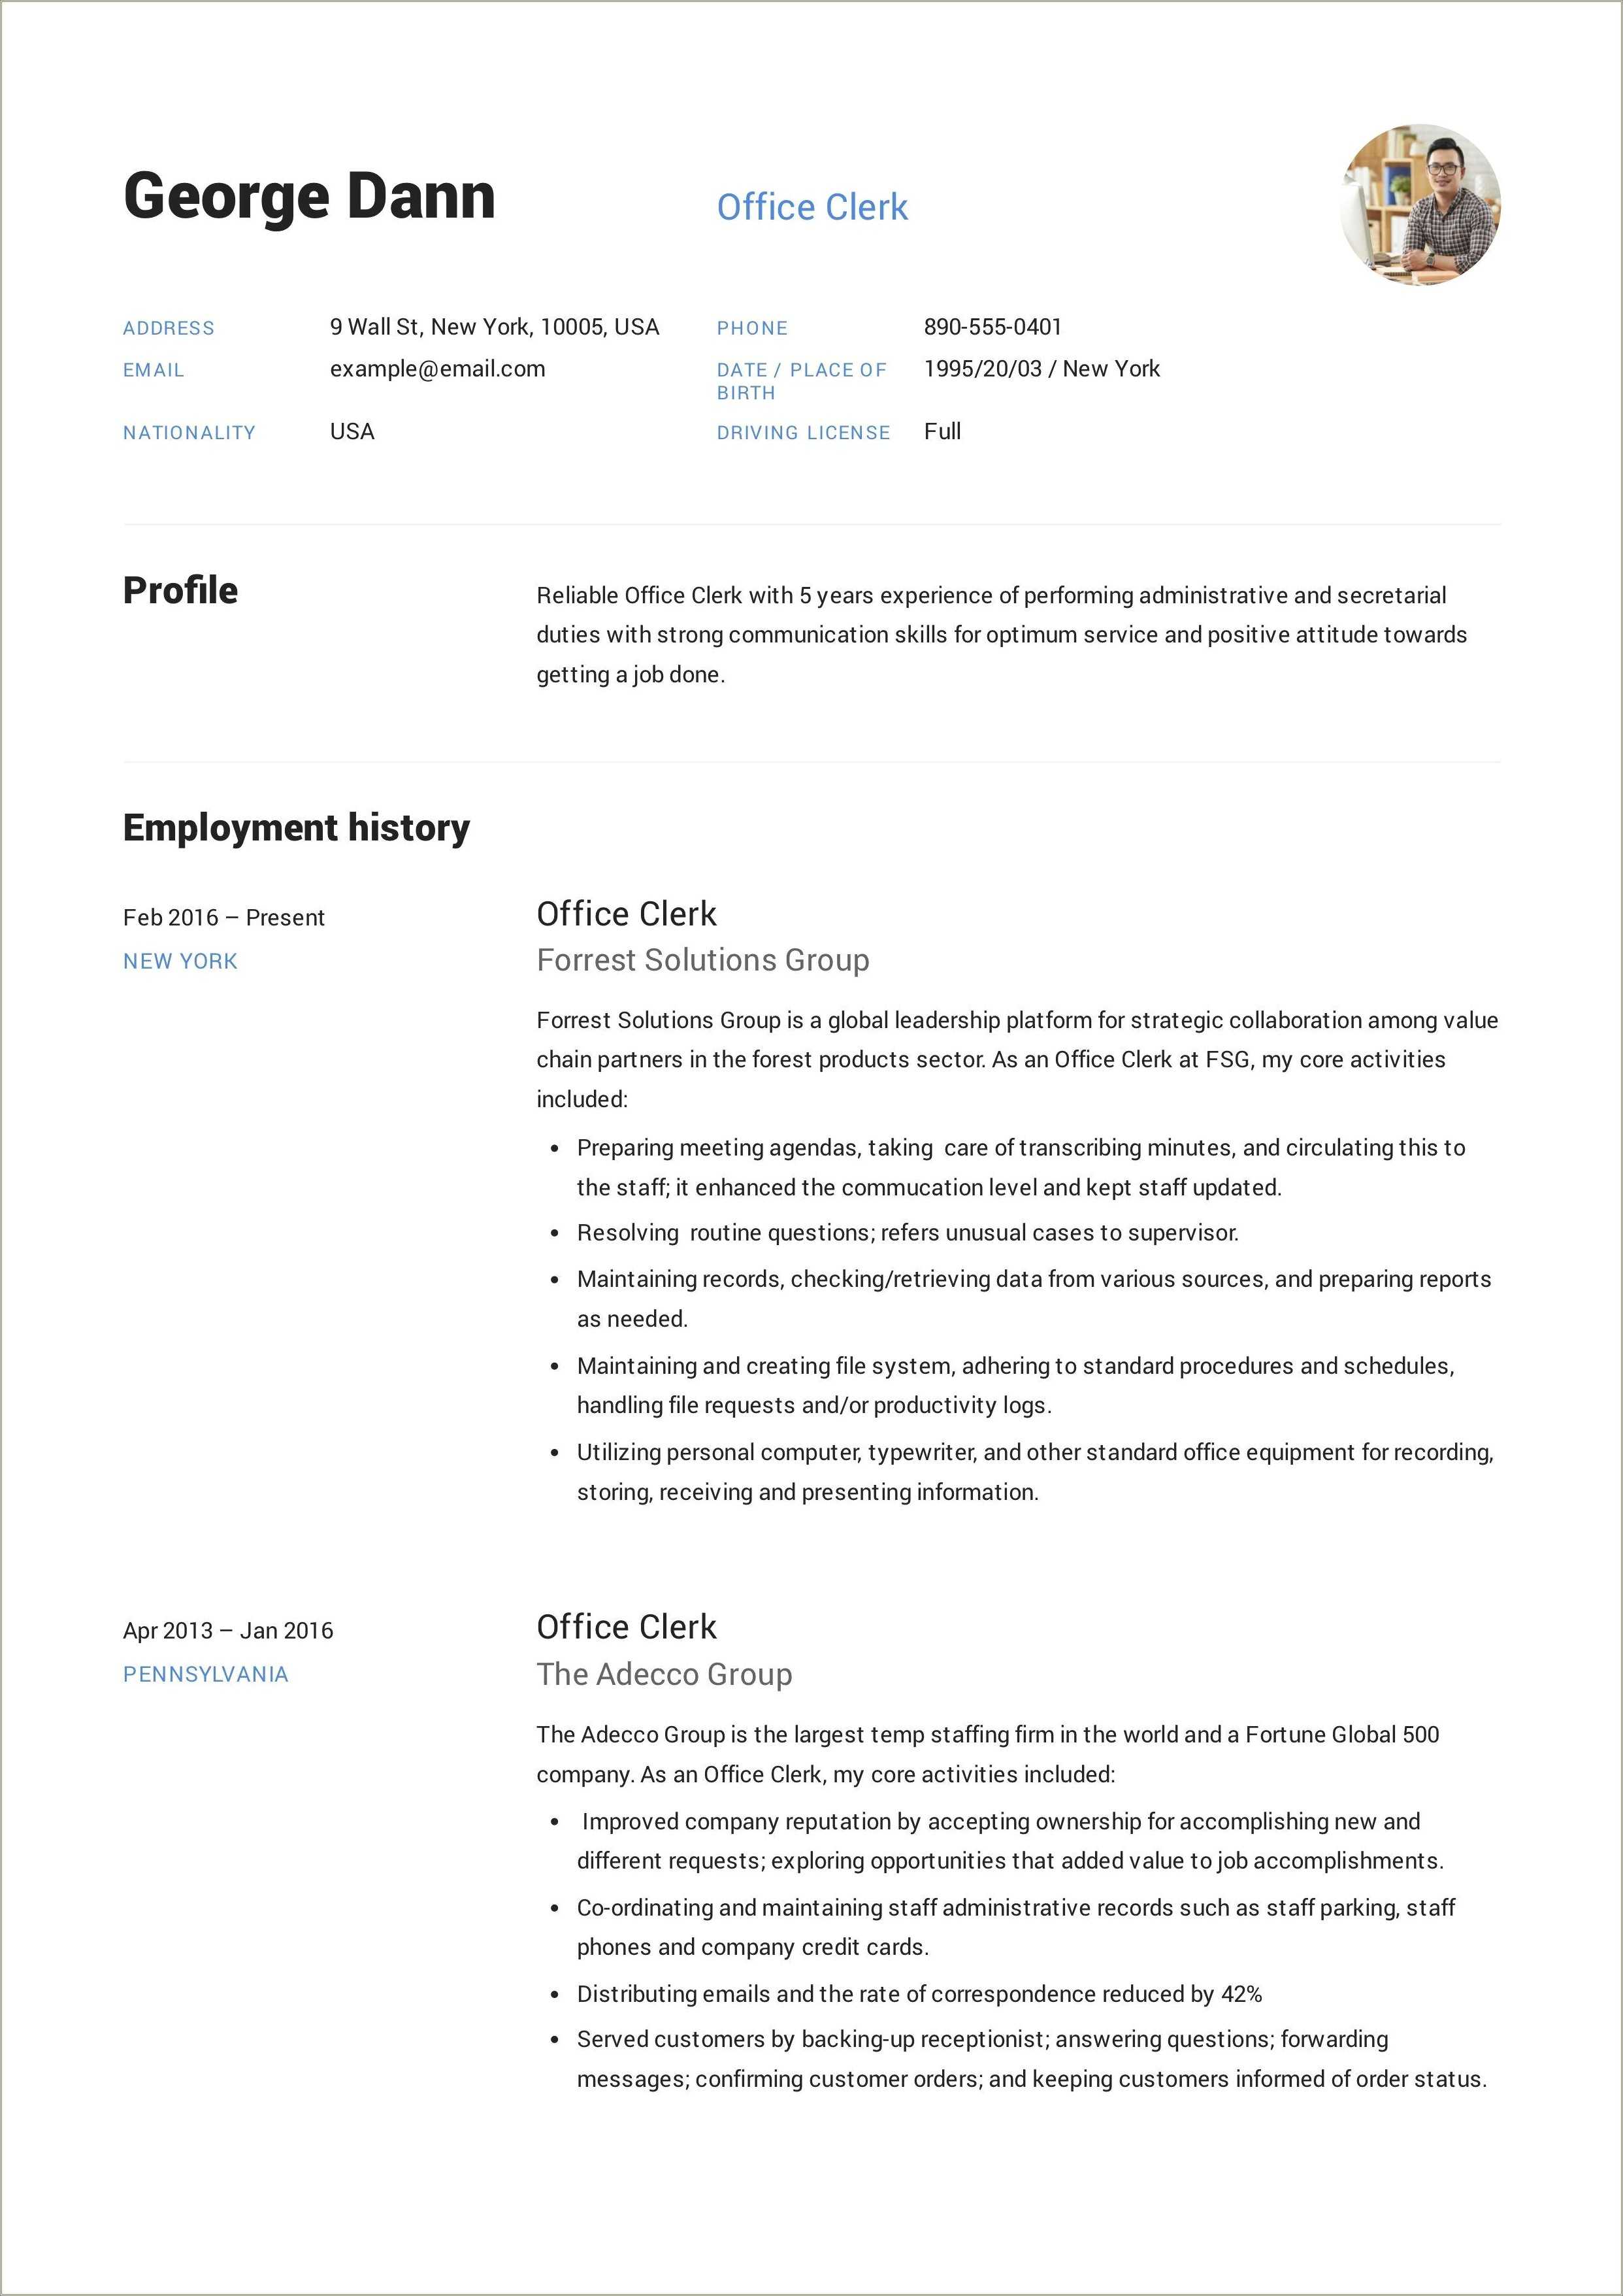 Sample Resume With Driving License - Resume Example Gallery